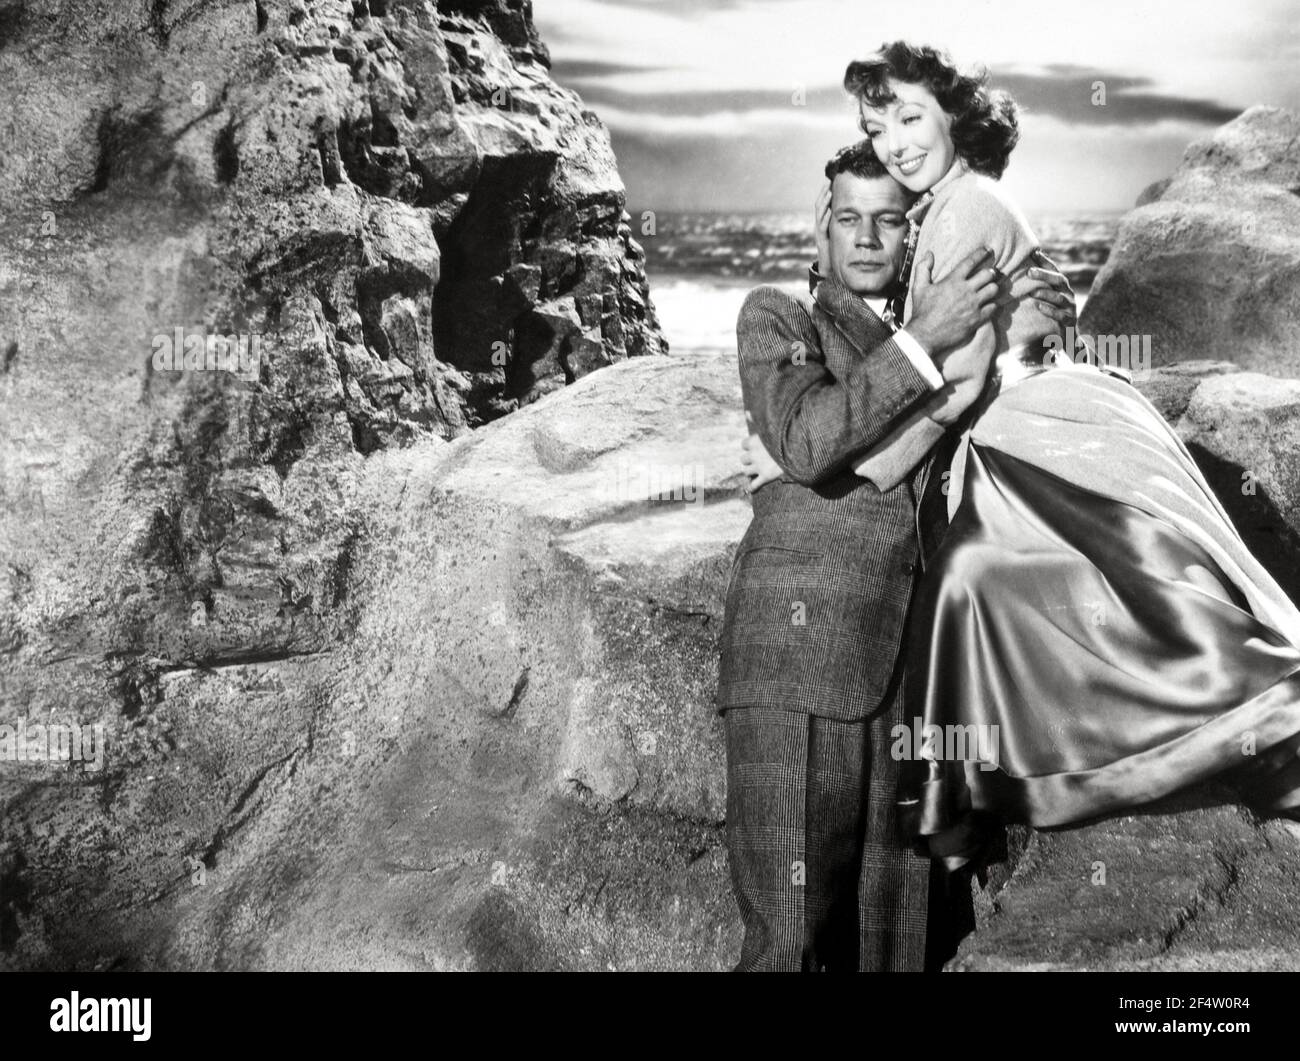 LORETTA YOUNG and JOSEPH COTTEN in HALF ANGEL (1951), directed by RICHARD SALE. Credit: 20TH CENTURY FOX / Album Stock Photo